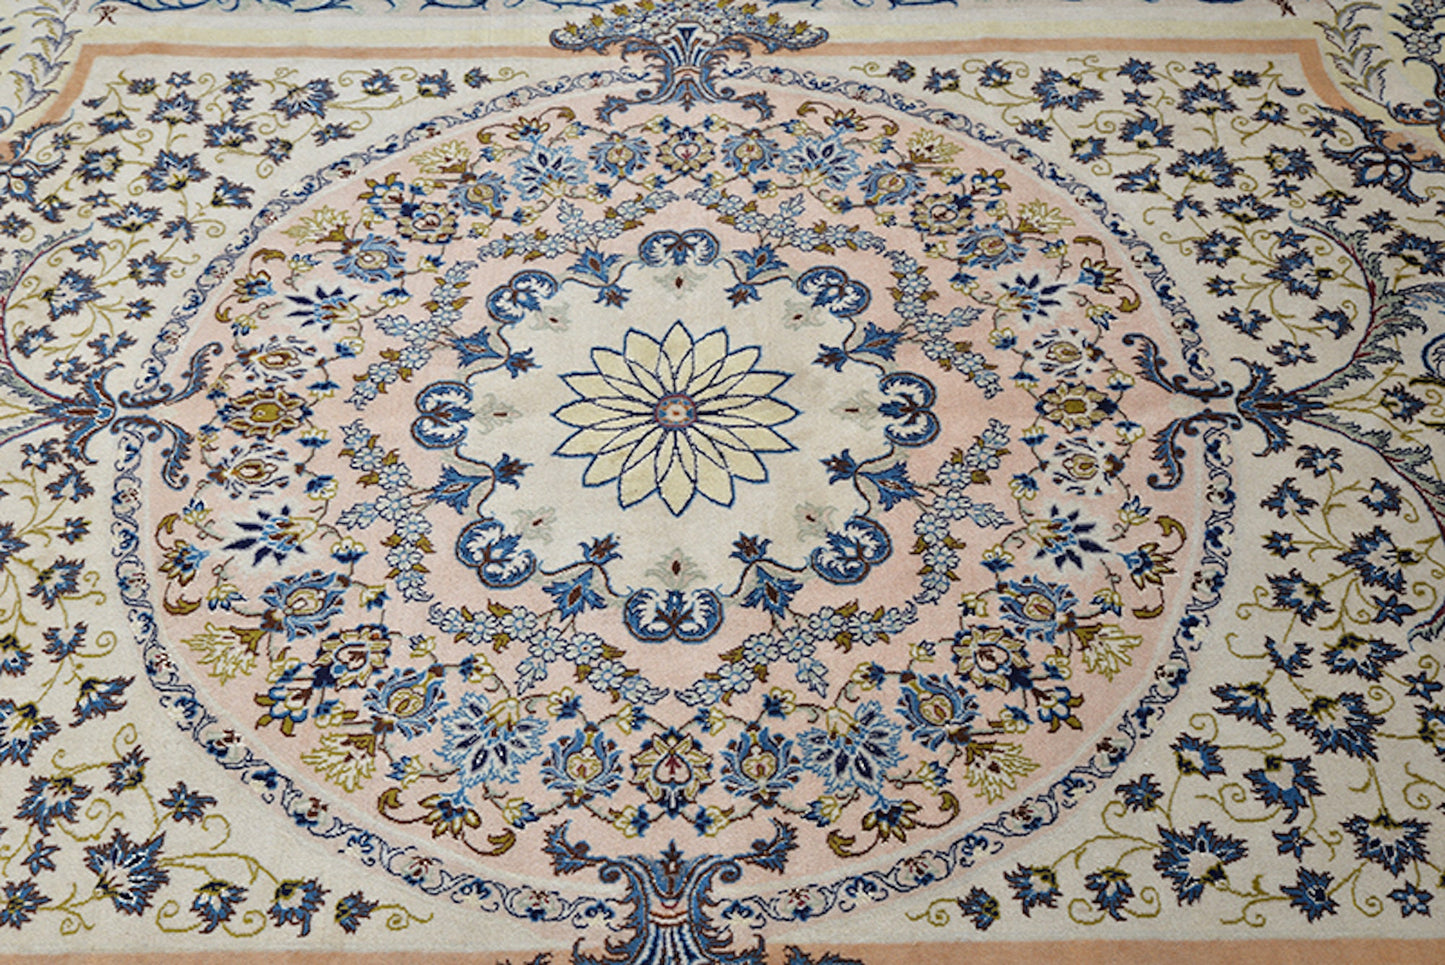 6 x 10 Feet Colorful Floral Medallion Rug | Hand Woven Area Rug | Oriental Persian Caucasian Rug | Bedroom Rug | Wool Traditional Vintage